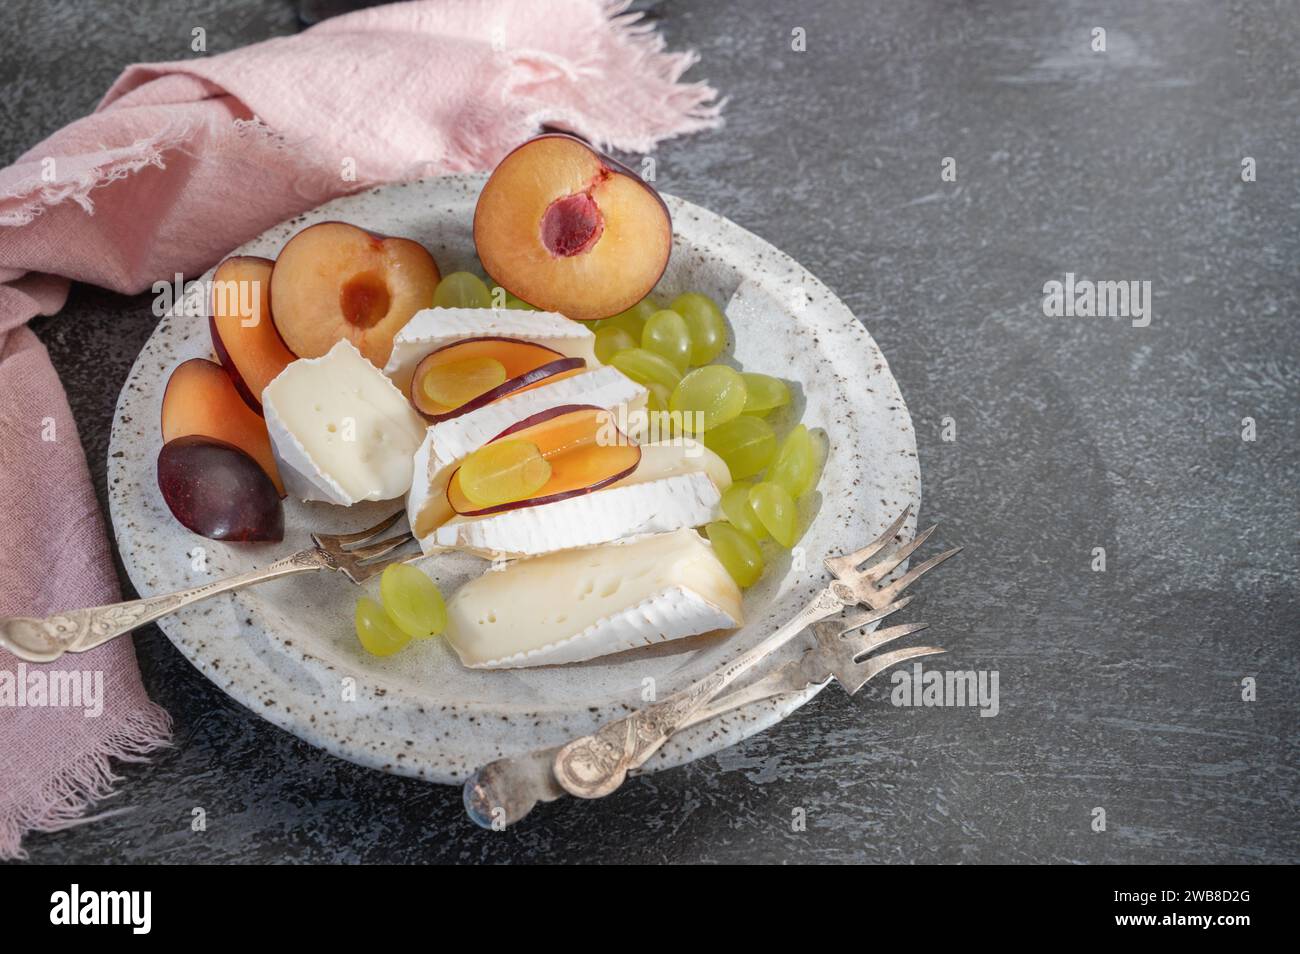 Camembert brie cheese with grapes and plums. Camembert and brie, sliced into bite-size pieces. Cheese served on handmade plates. Top view, flat displa Stock Photo